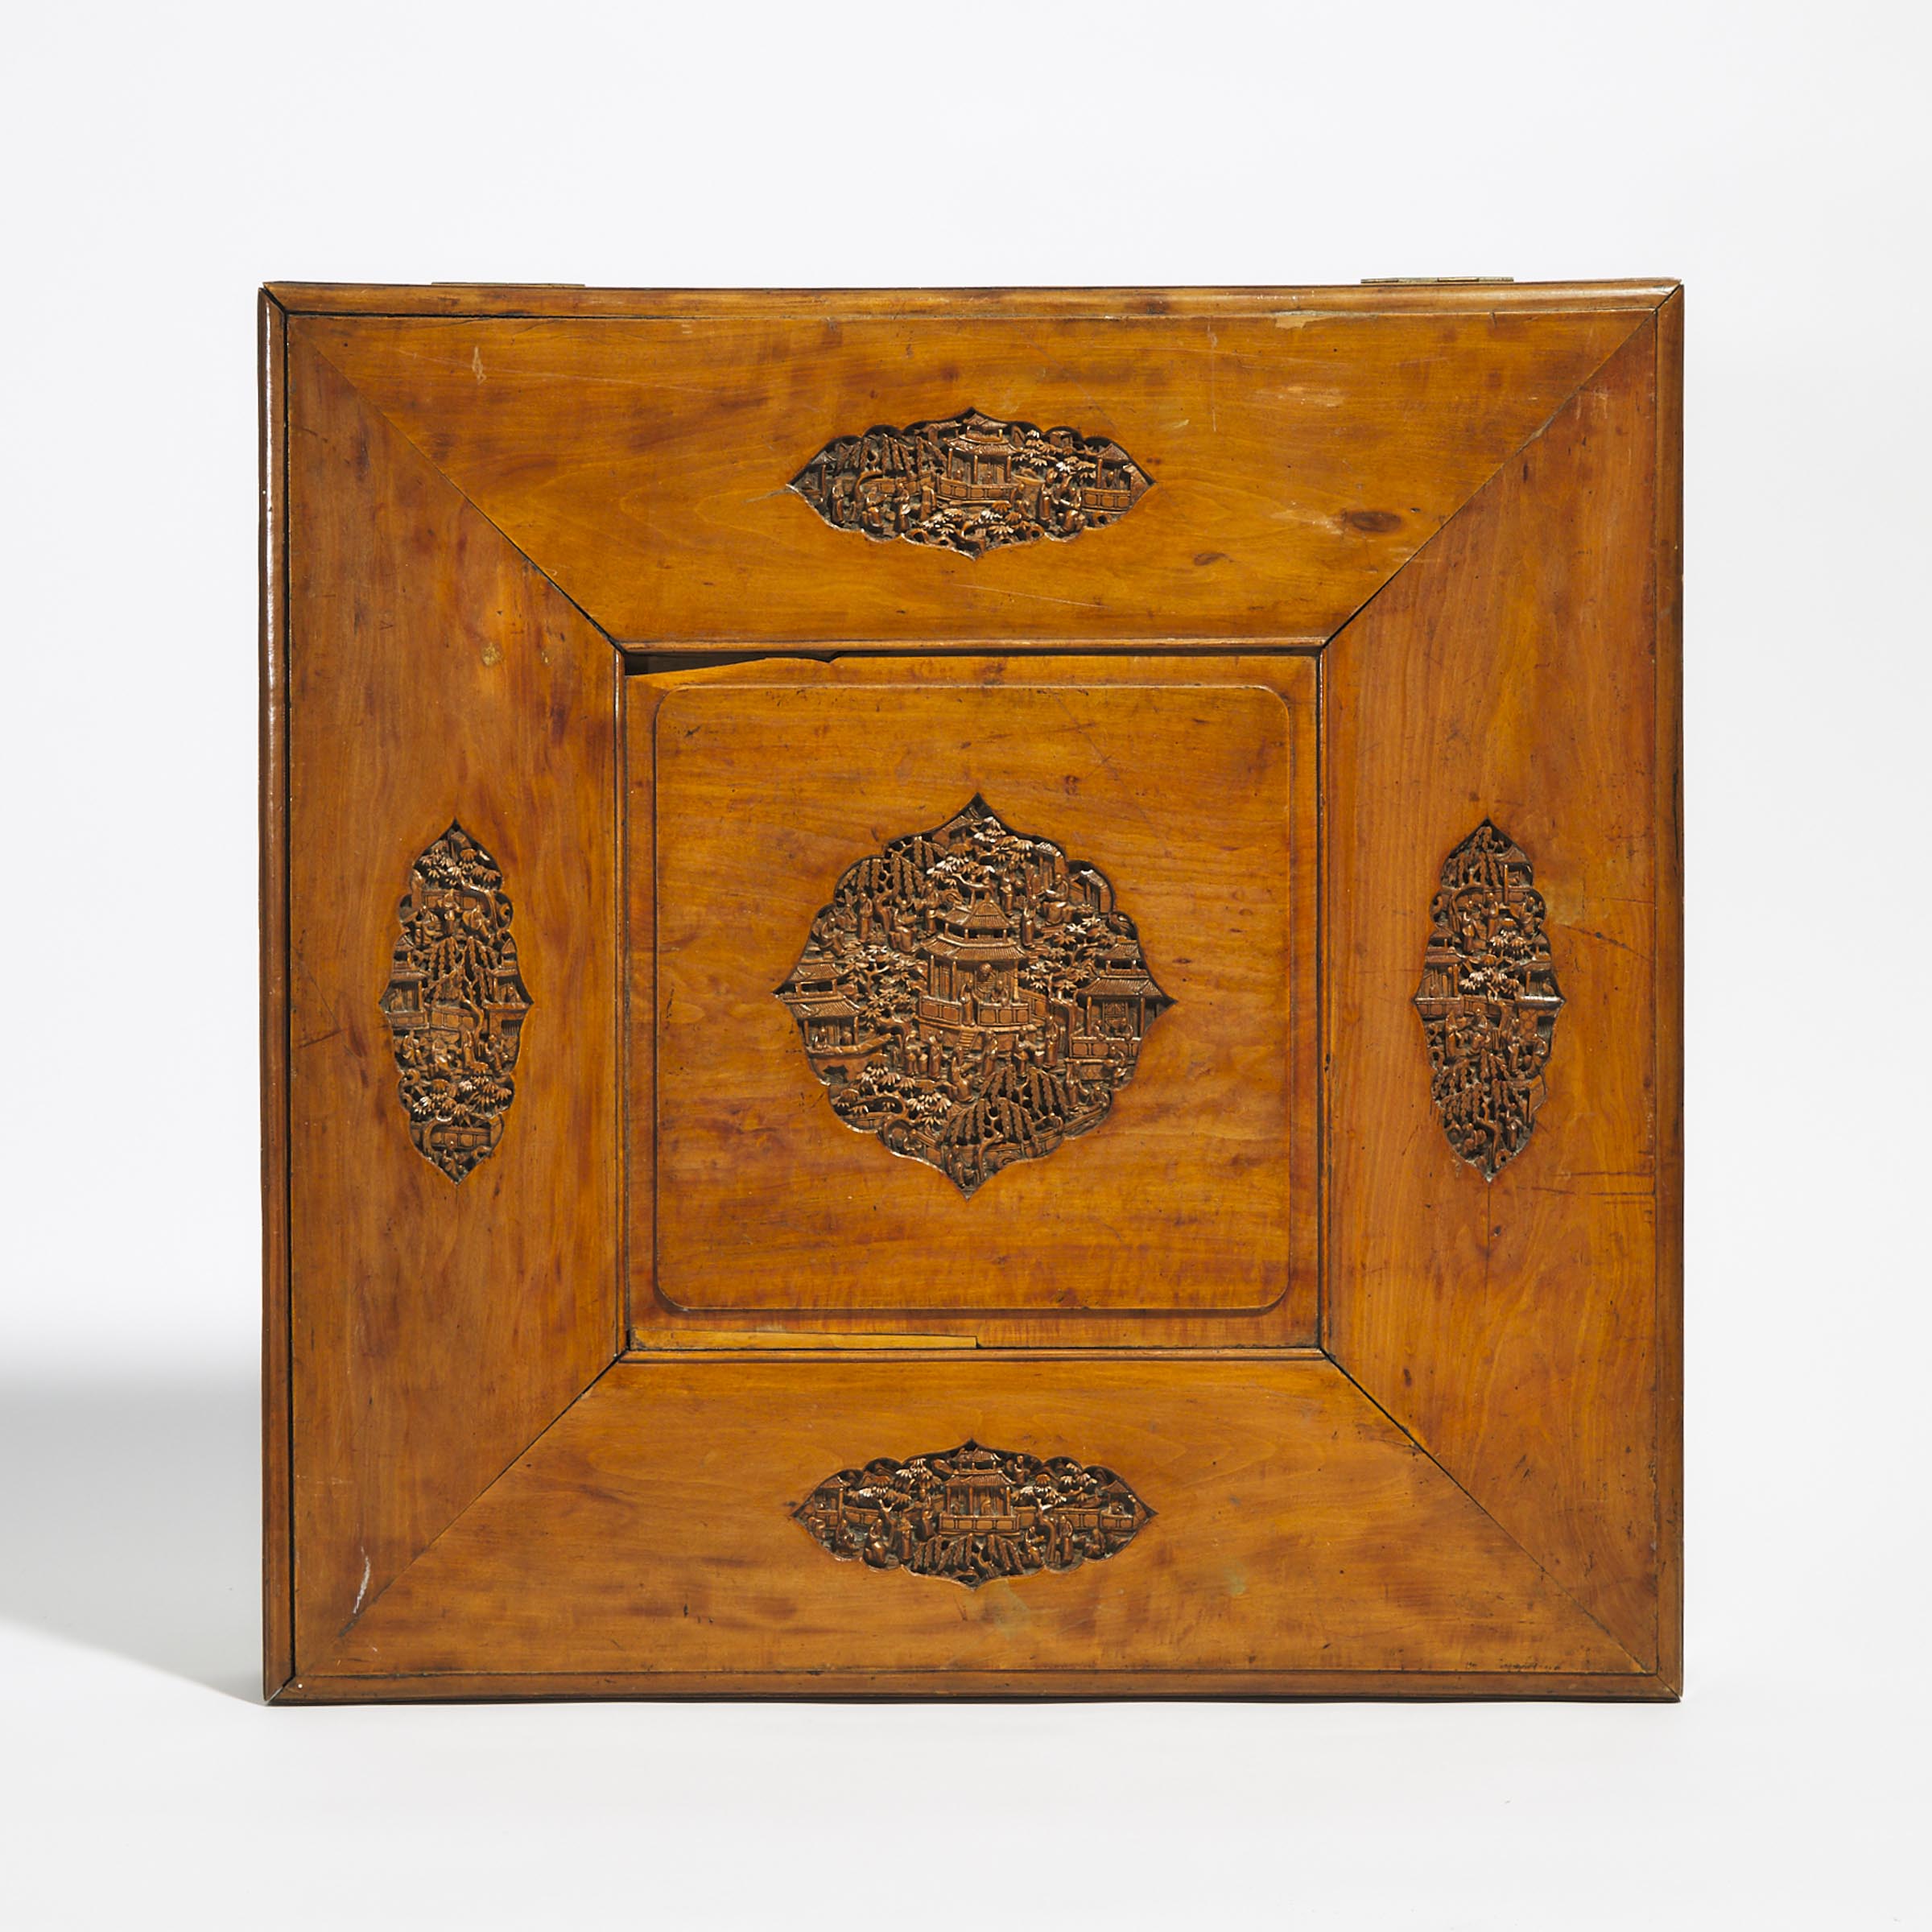 A Chinese Carved Oak Wood Presentation Box, Late 19th/Early 20th Century